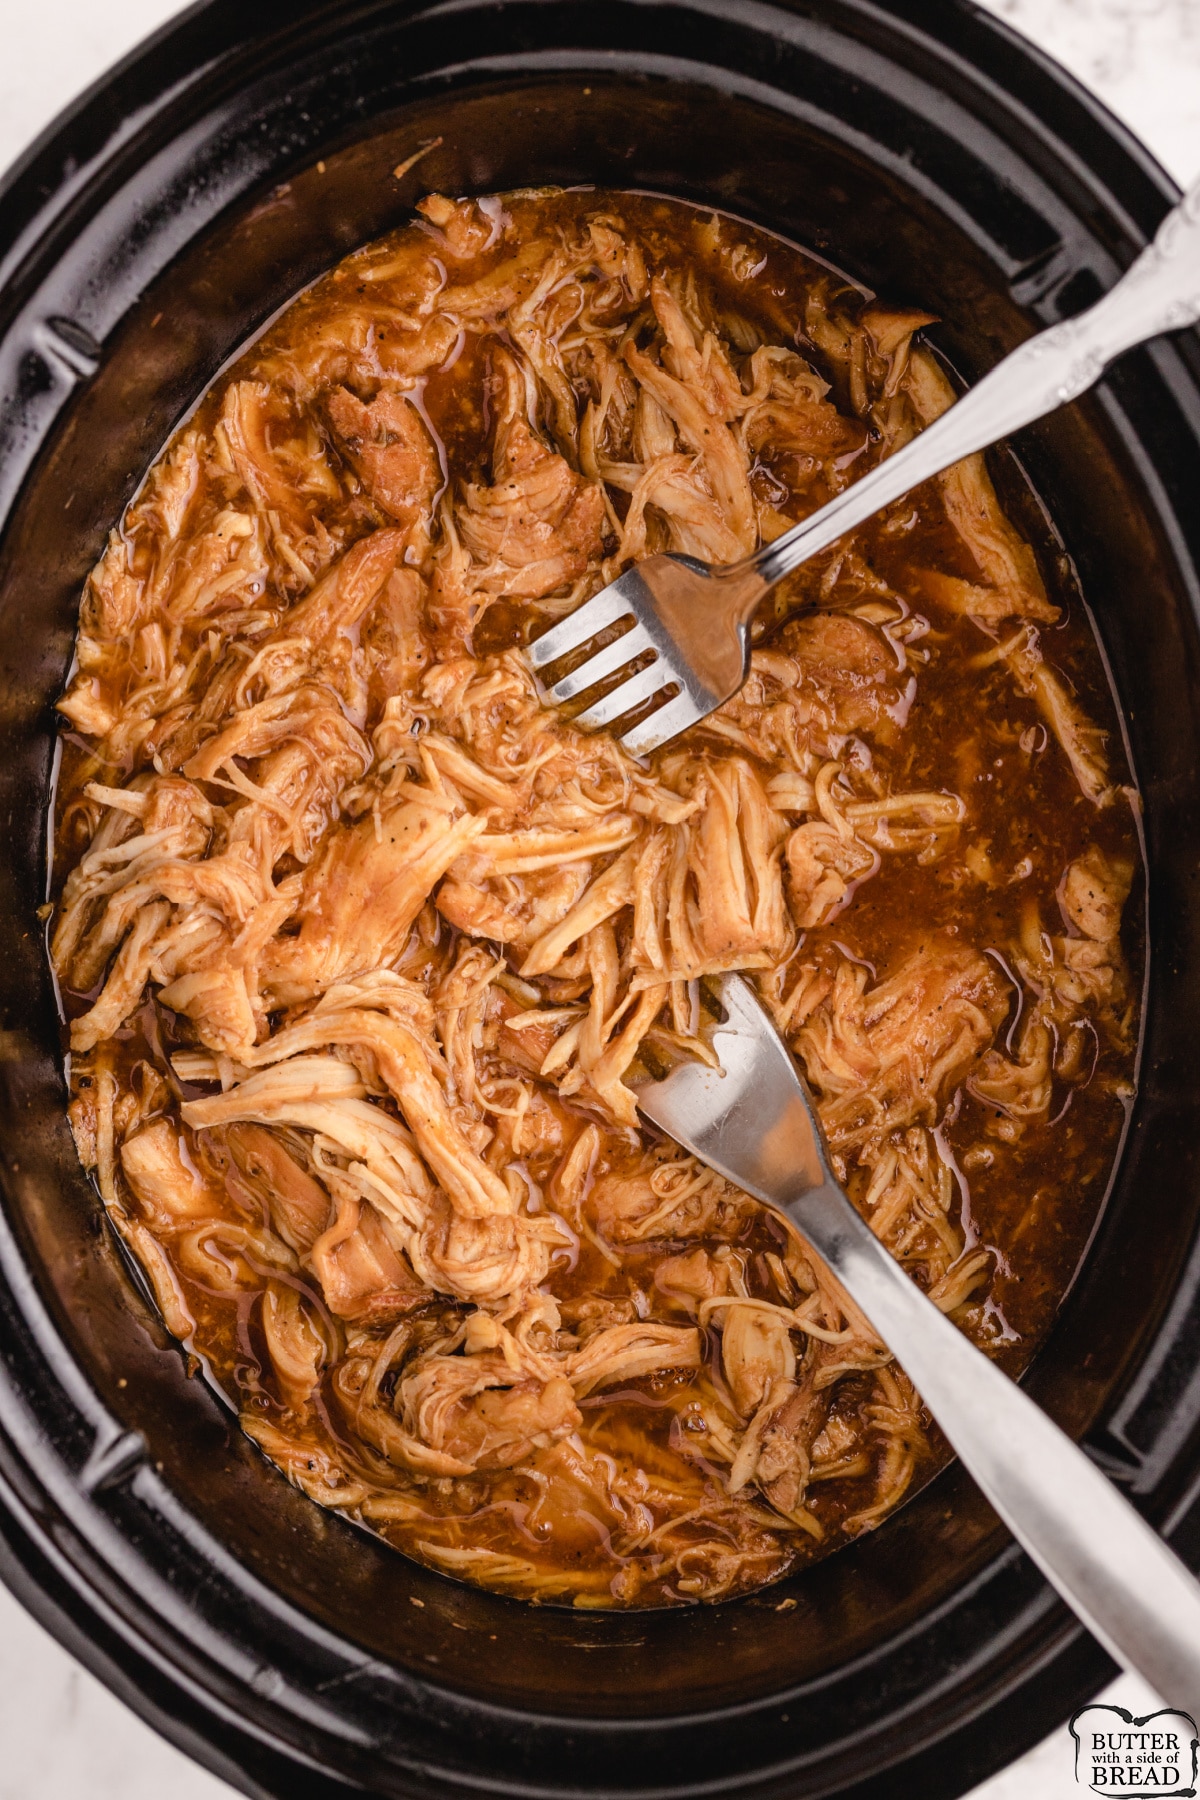 Slow Cooker Root Beer BBQ Chicken is made with chicken breasts, root beer and BBQ sauce - that's it! Tender, juicy barbecue chicken recipe that is perfect for sandwiches or served over rice. 